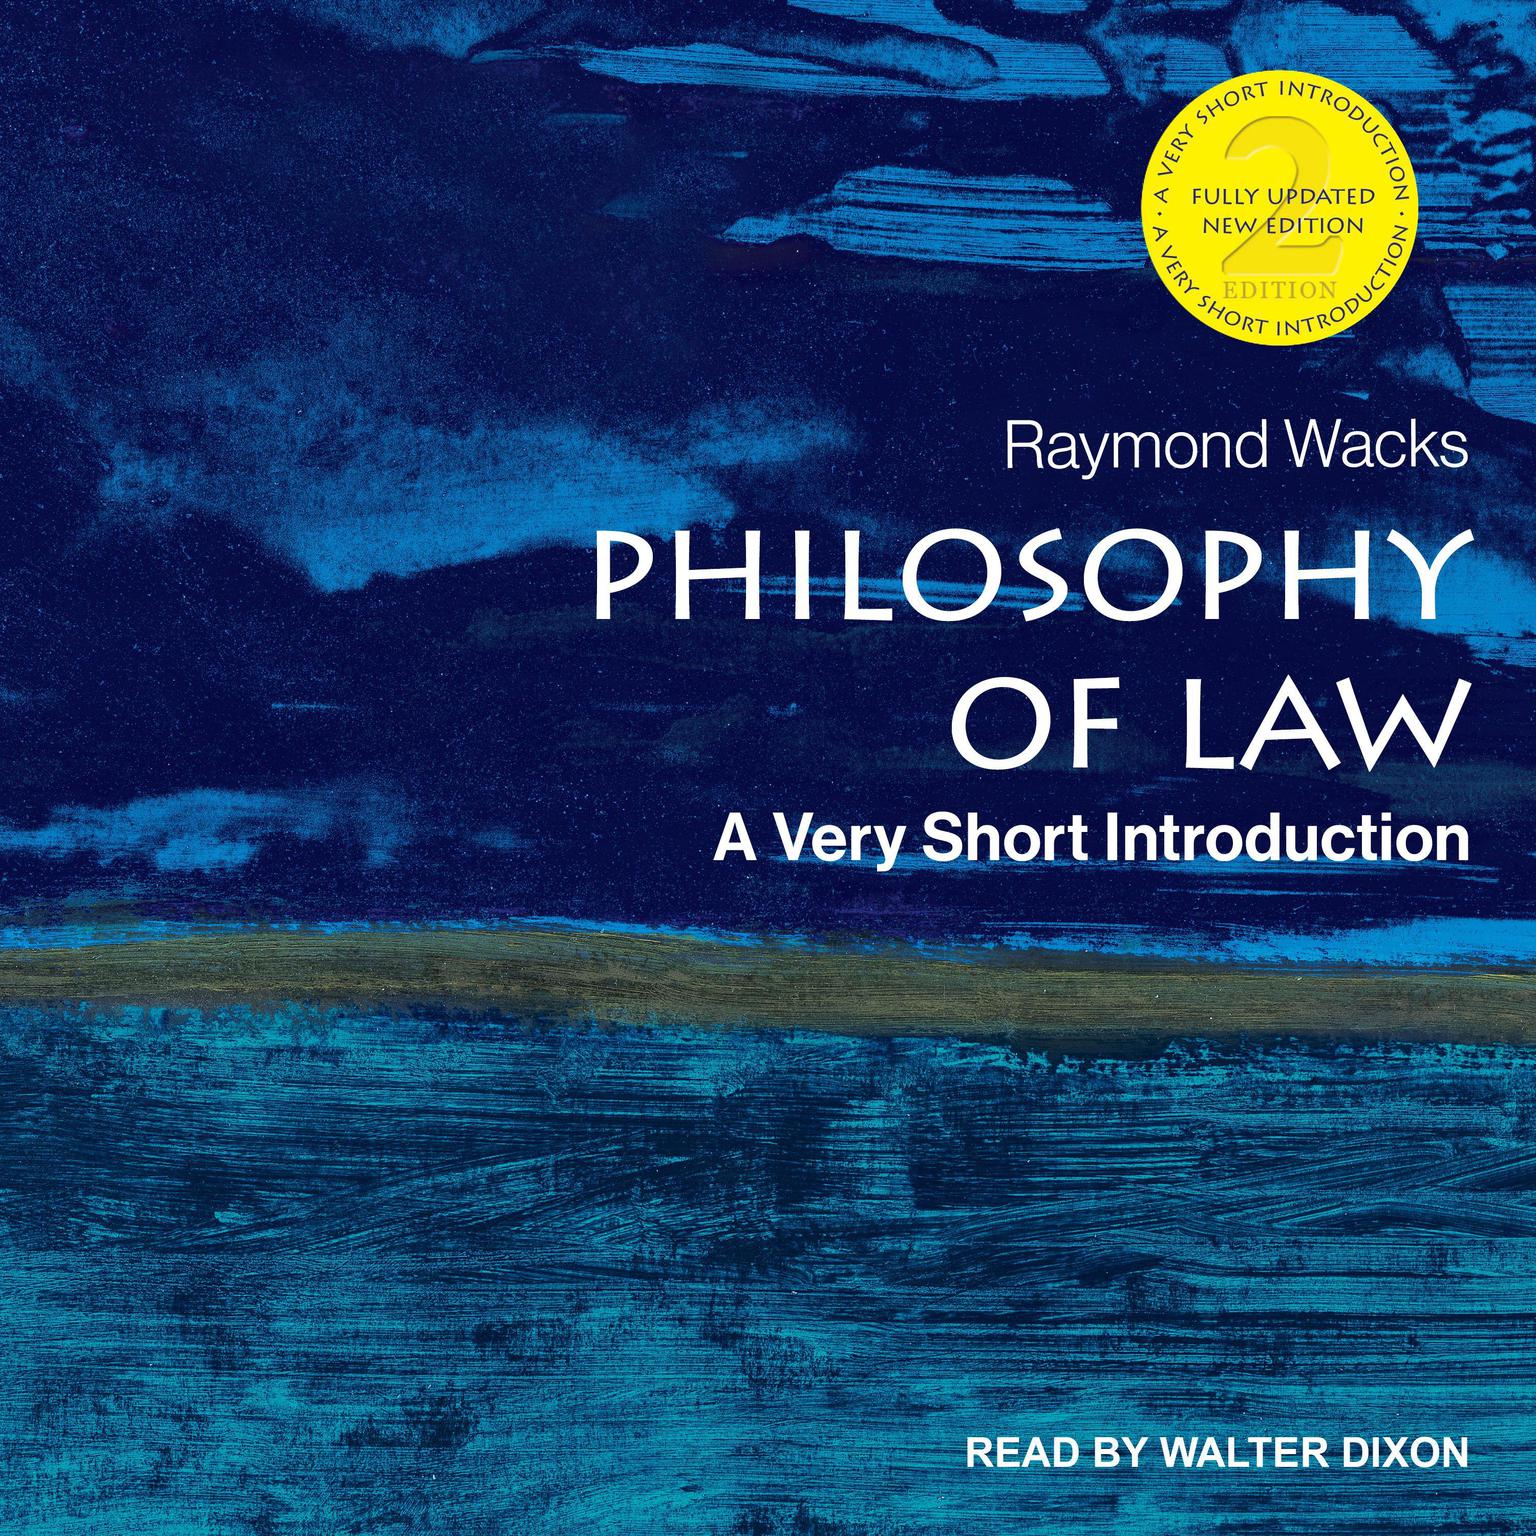 Philosophy of Law: A Very Short Introduction, 2nd Edition Audiobook, by Raymond Wacks